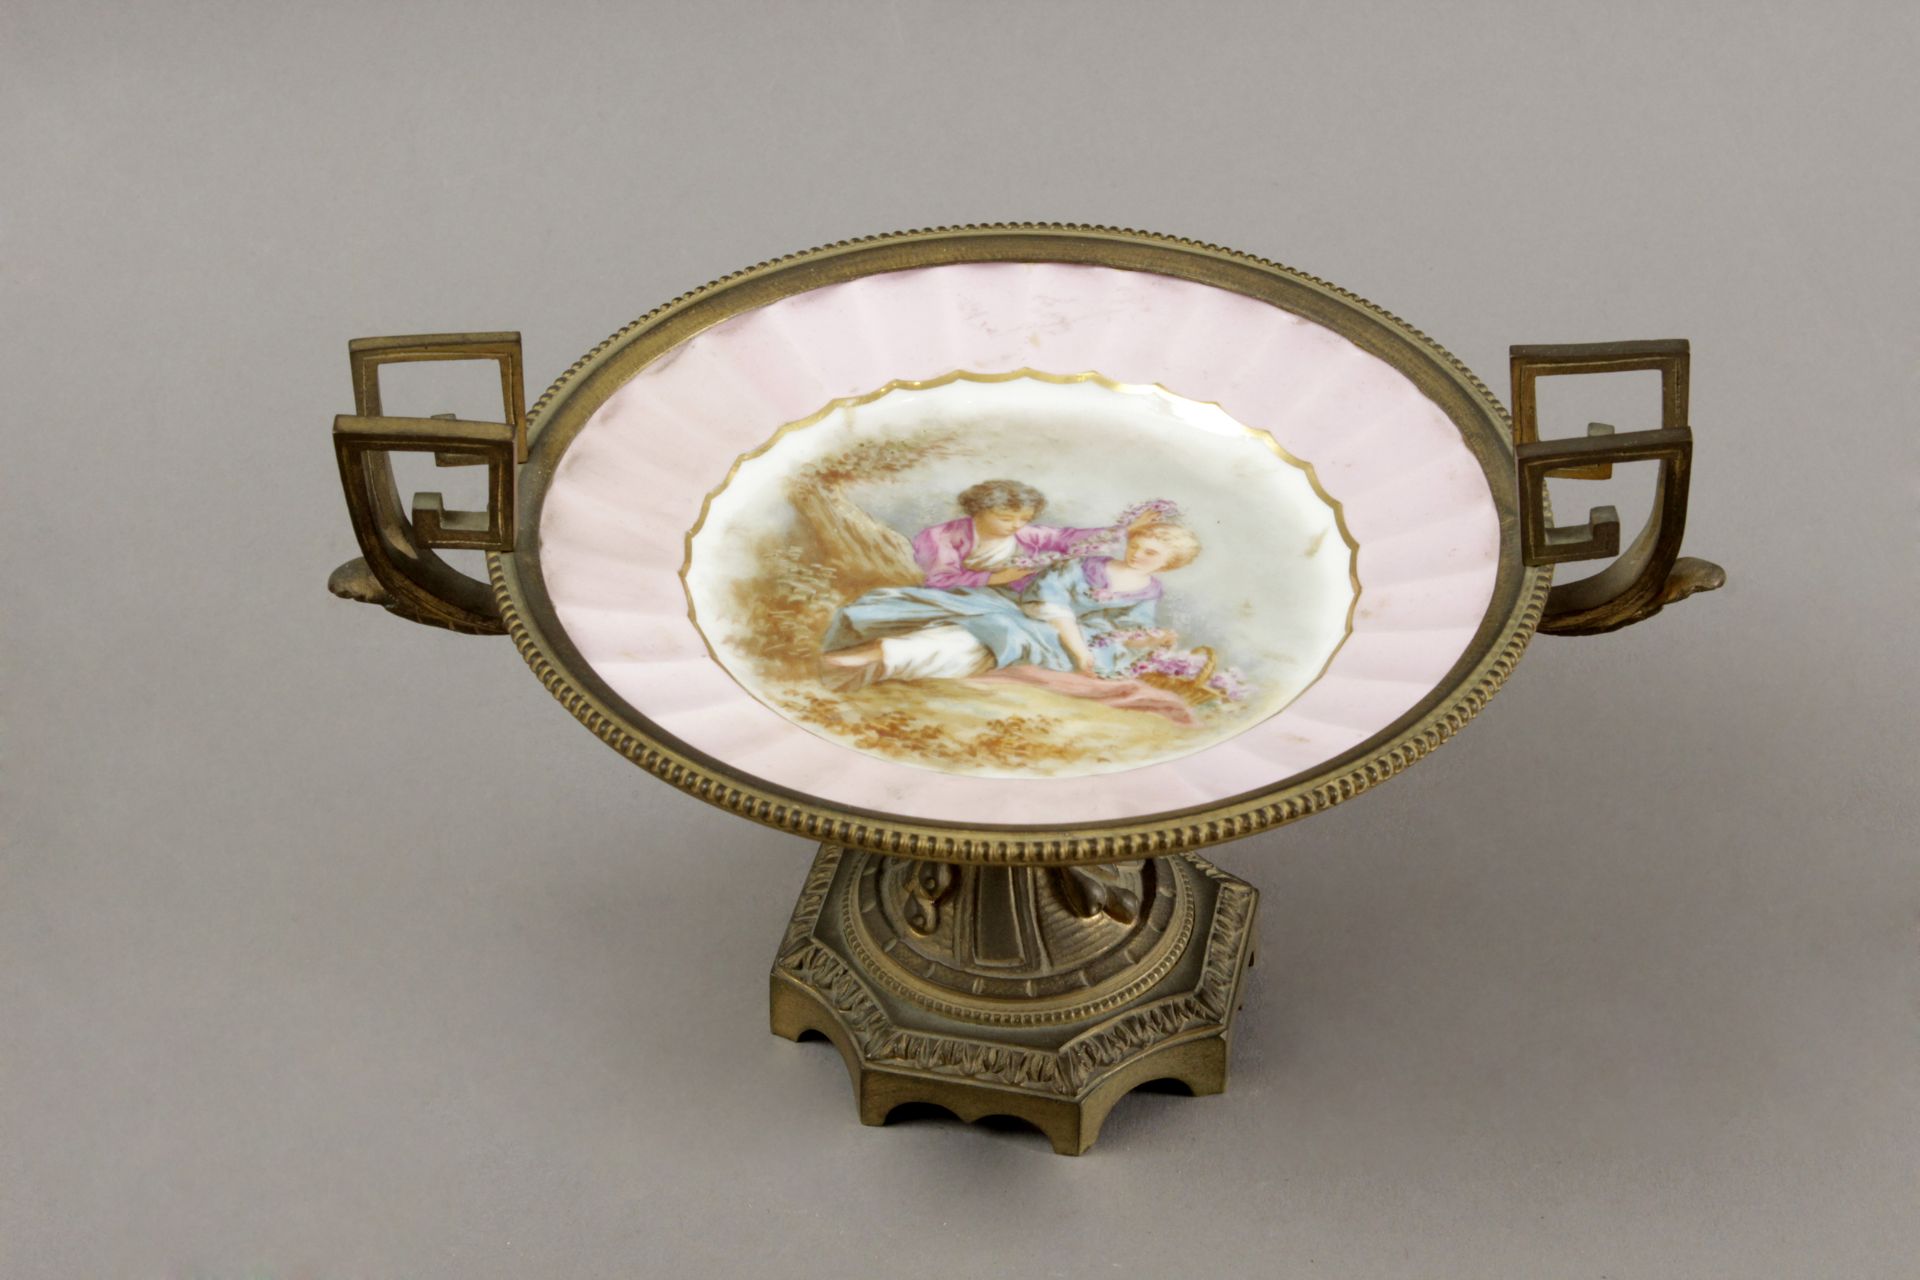 A late 19th century French gilt bronze centrepiece with a Sévres porcelain plate